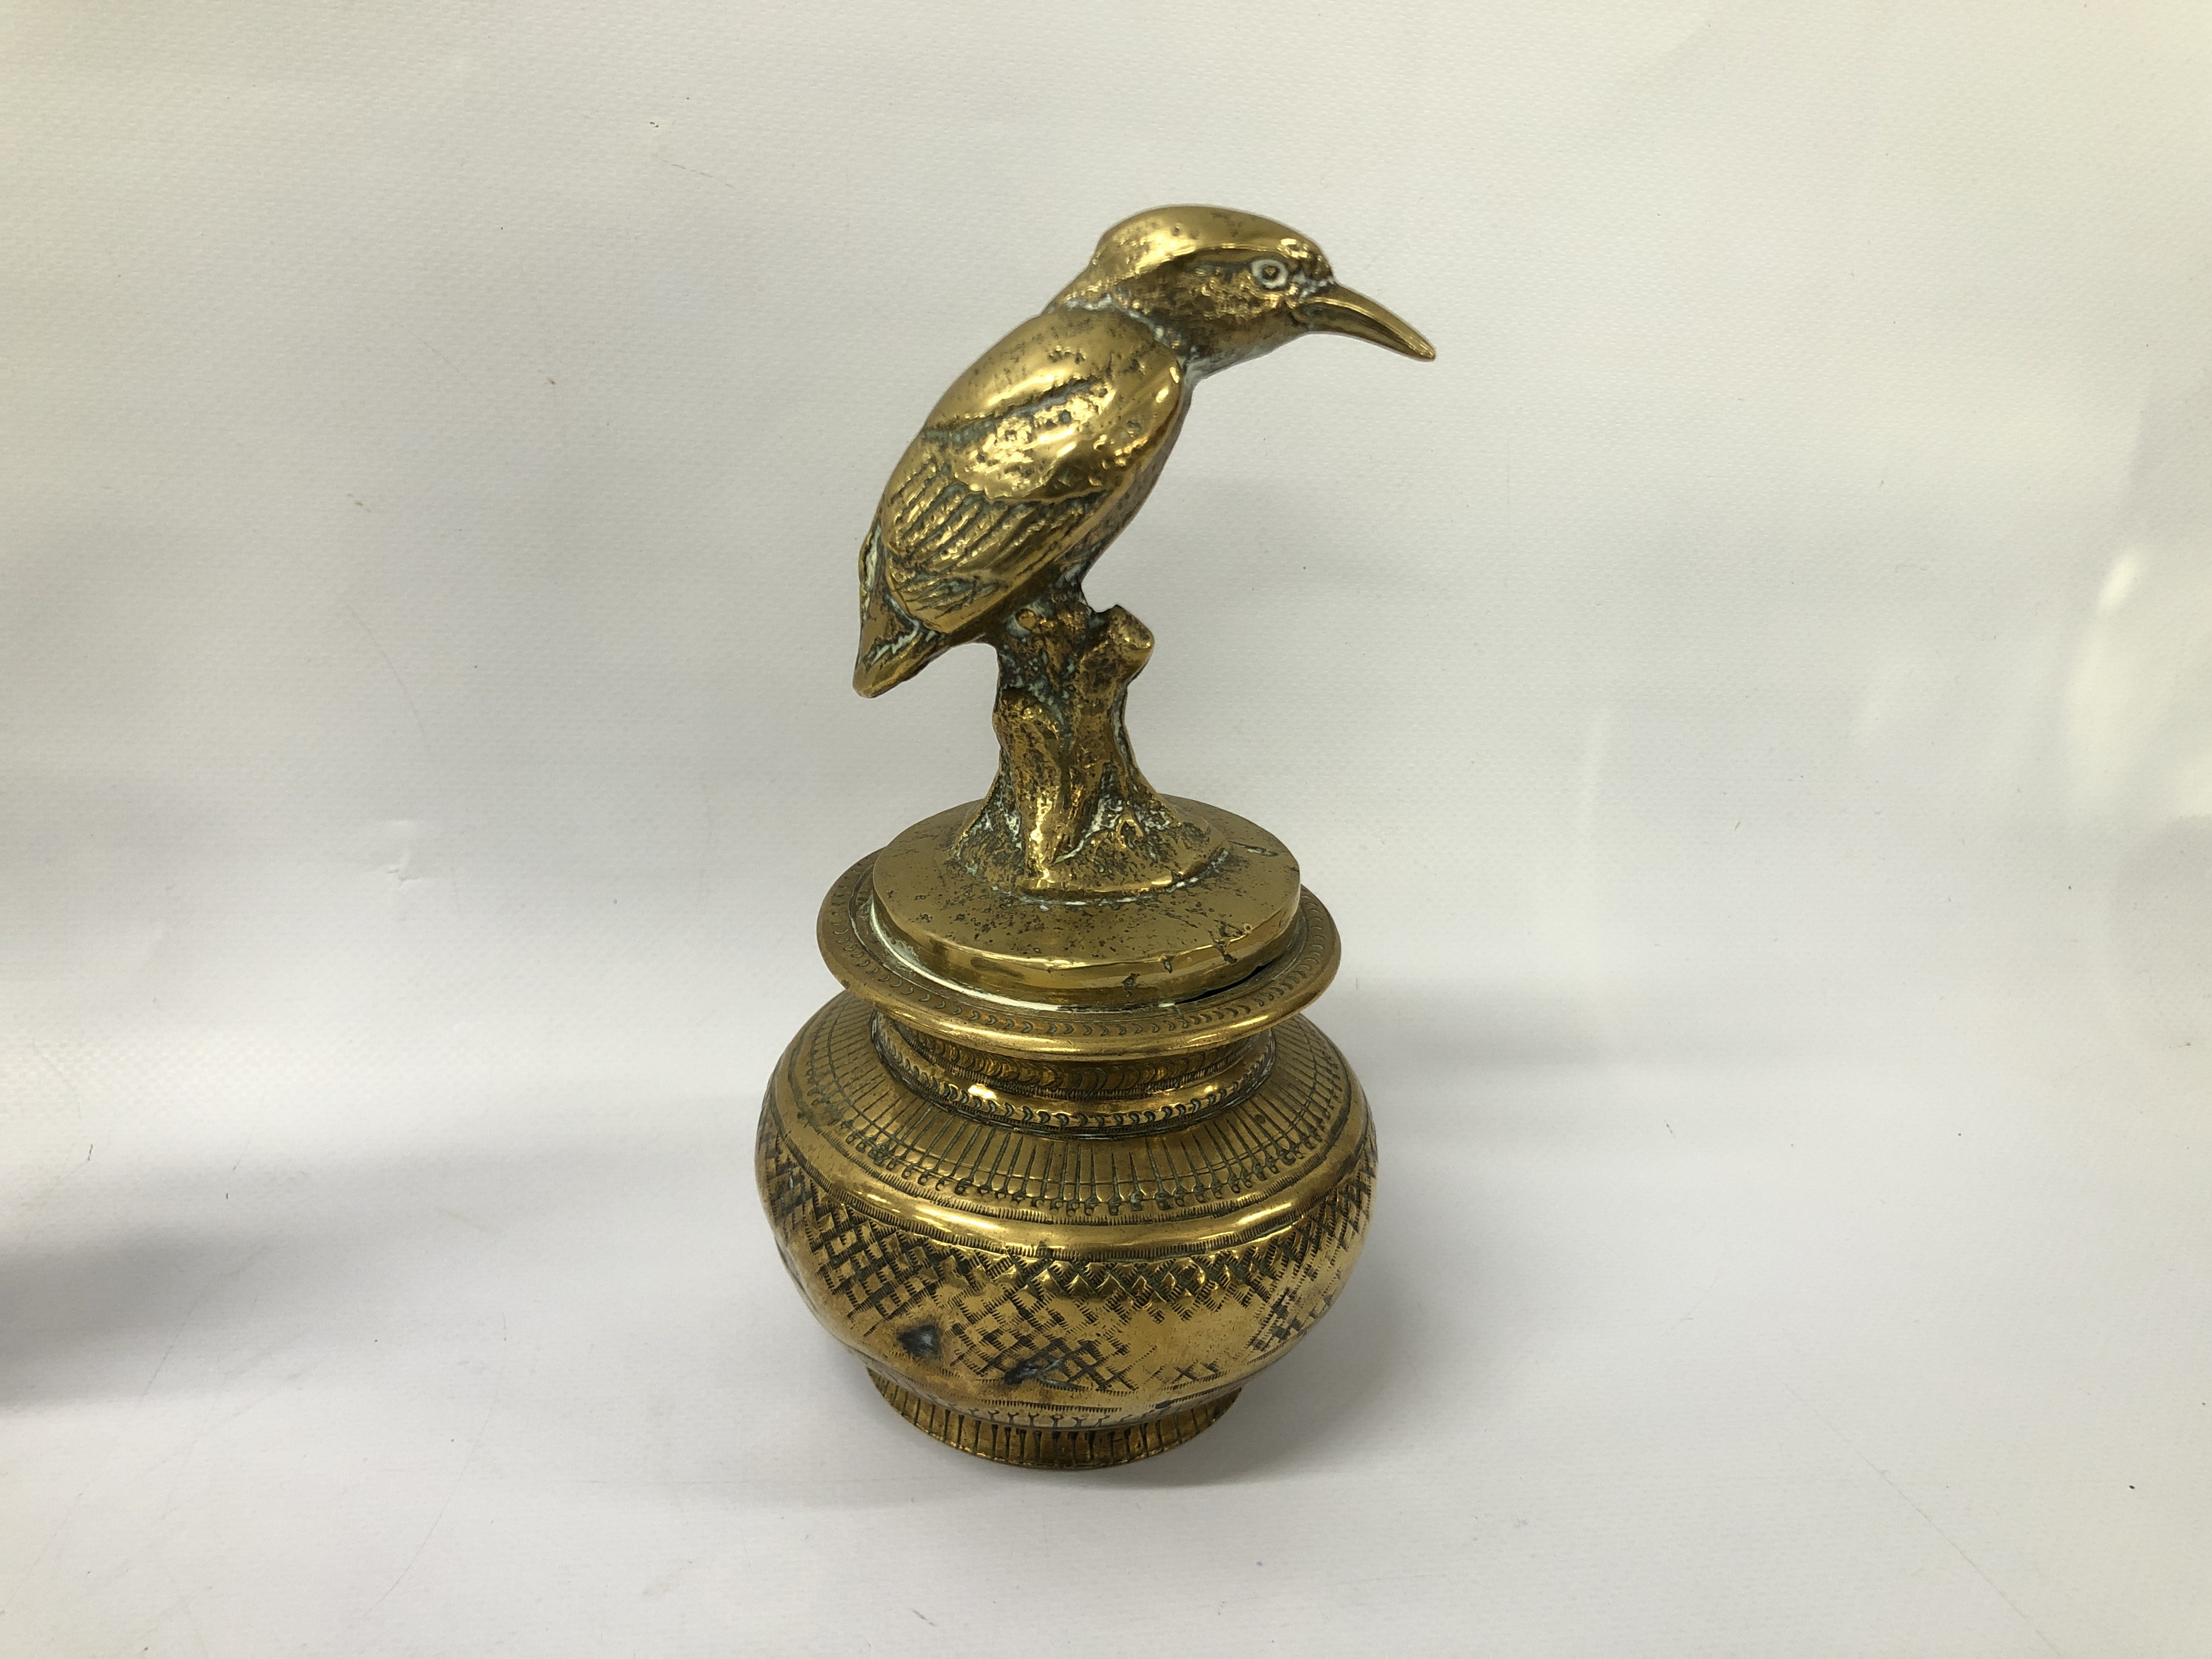 DECORATIVE BRASS INKWELL, HEAVY BRASS KINGFISHER ORNAMENT ON A DECORATIVE ENGRAVED BASE, - Image 3 of 10